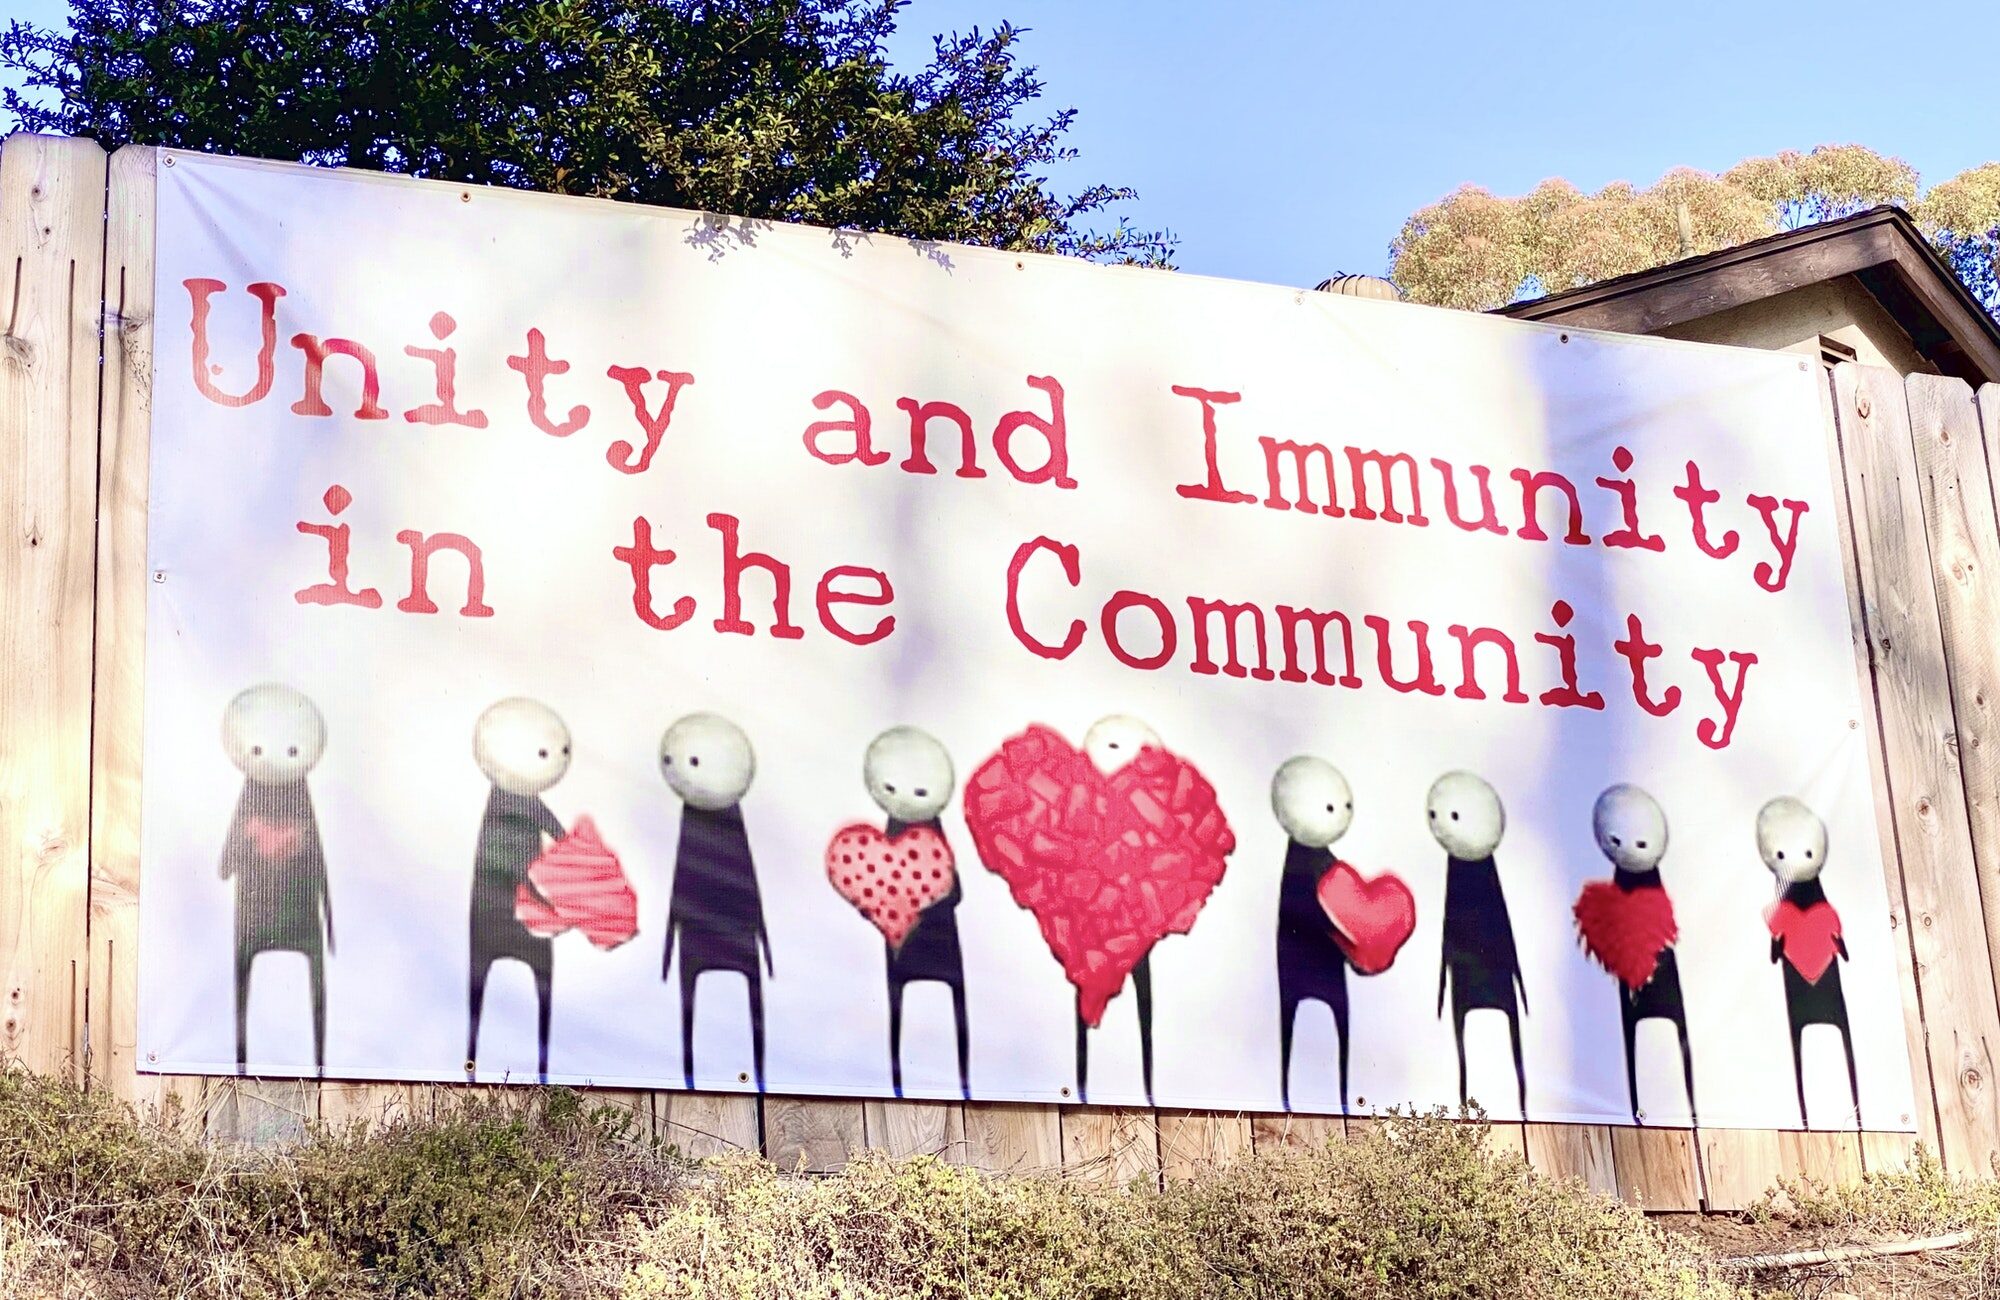 Authentic real community banner sign calling for unity and immunity in the community